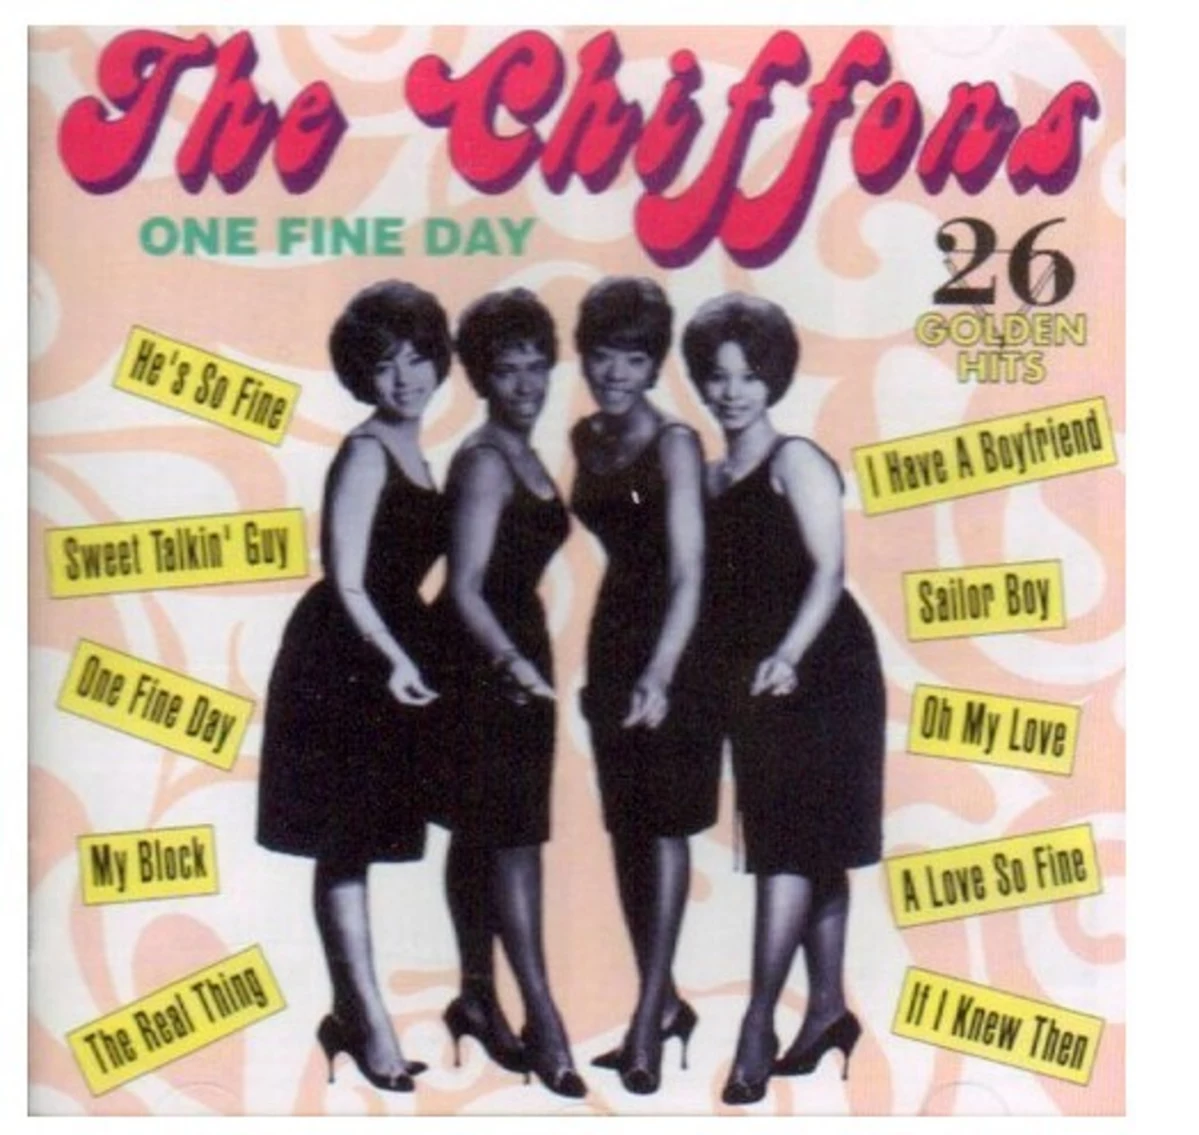 Thursday Oldies Flashback: The Chiffons “One Fine Day” (VIDEO)